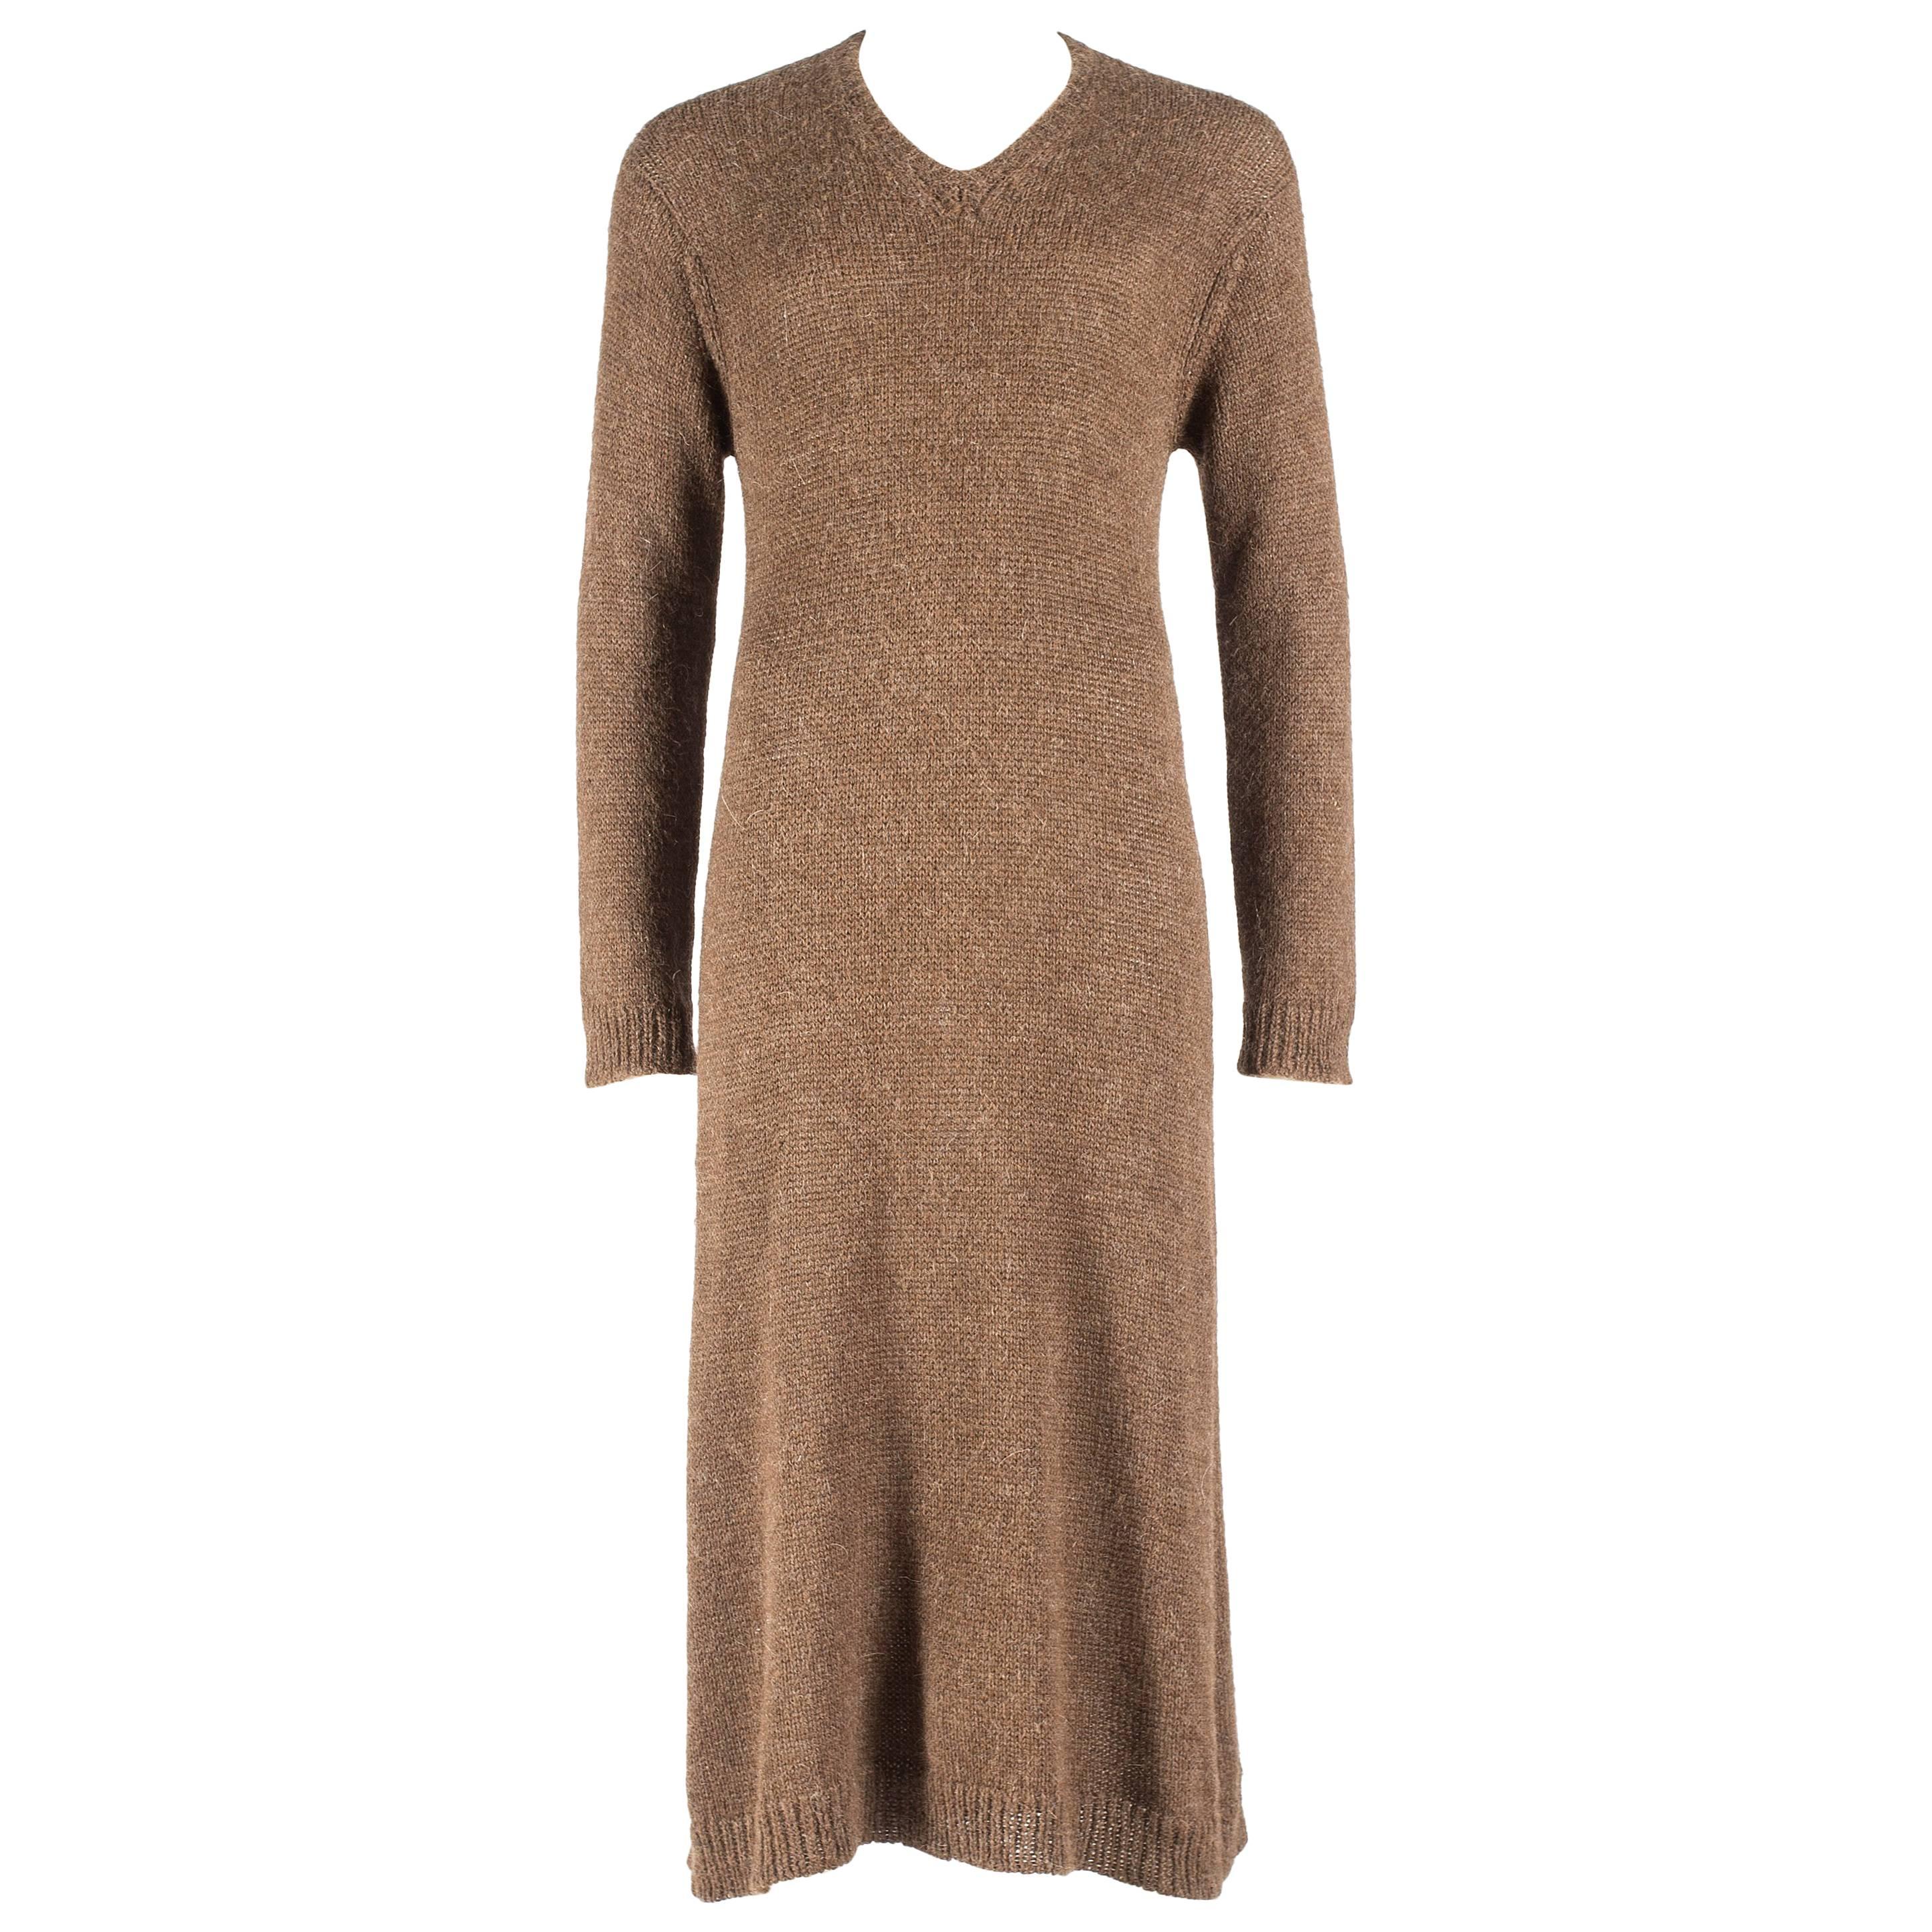 Comme des Garcons Homme Plus brown wool knitted v-neck sweater dress, A / W 1995 For Sale